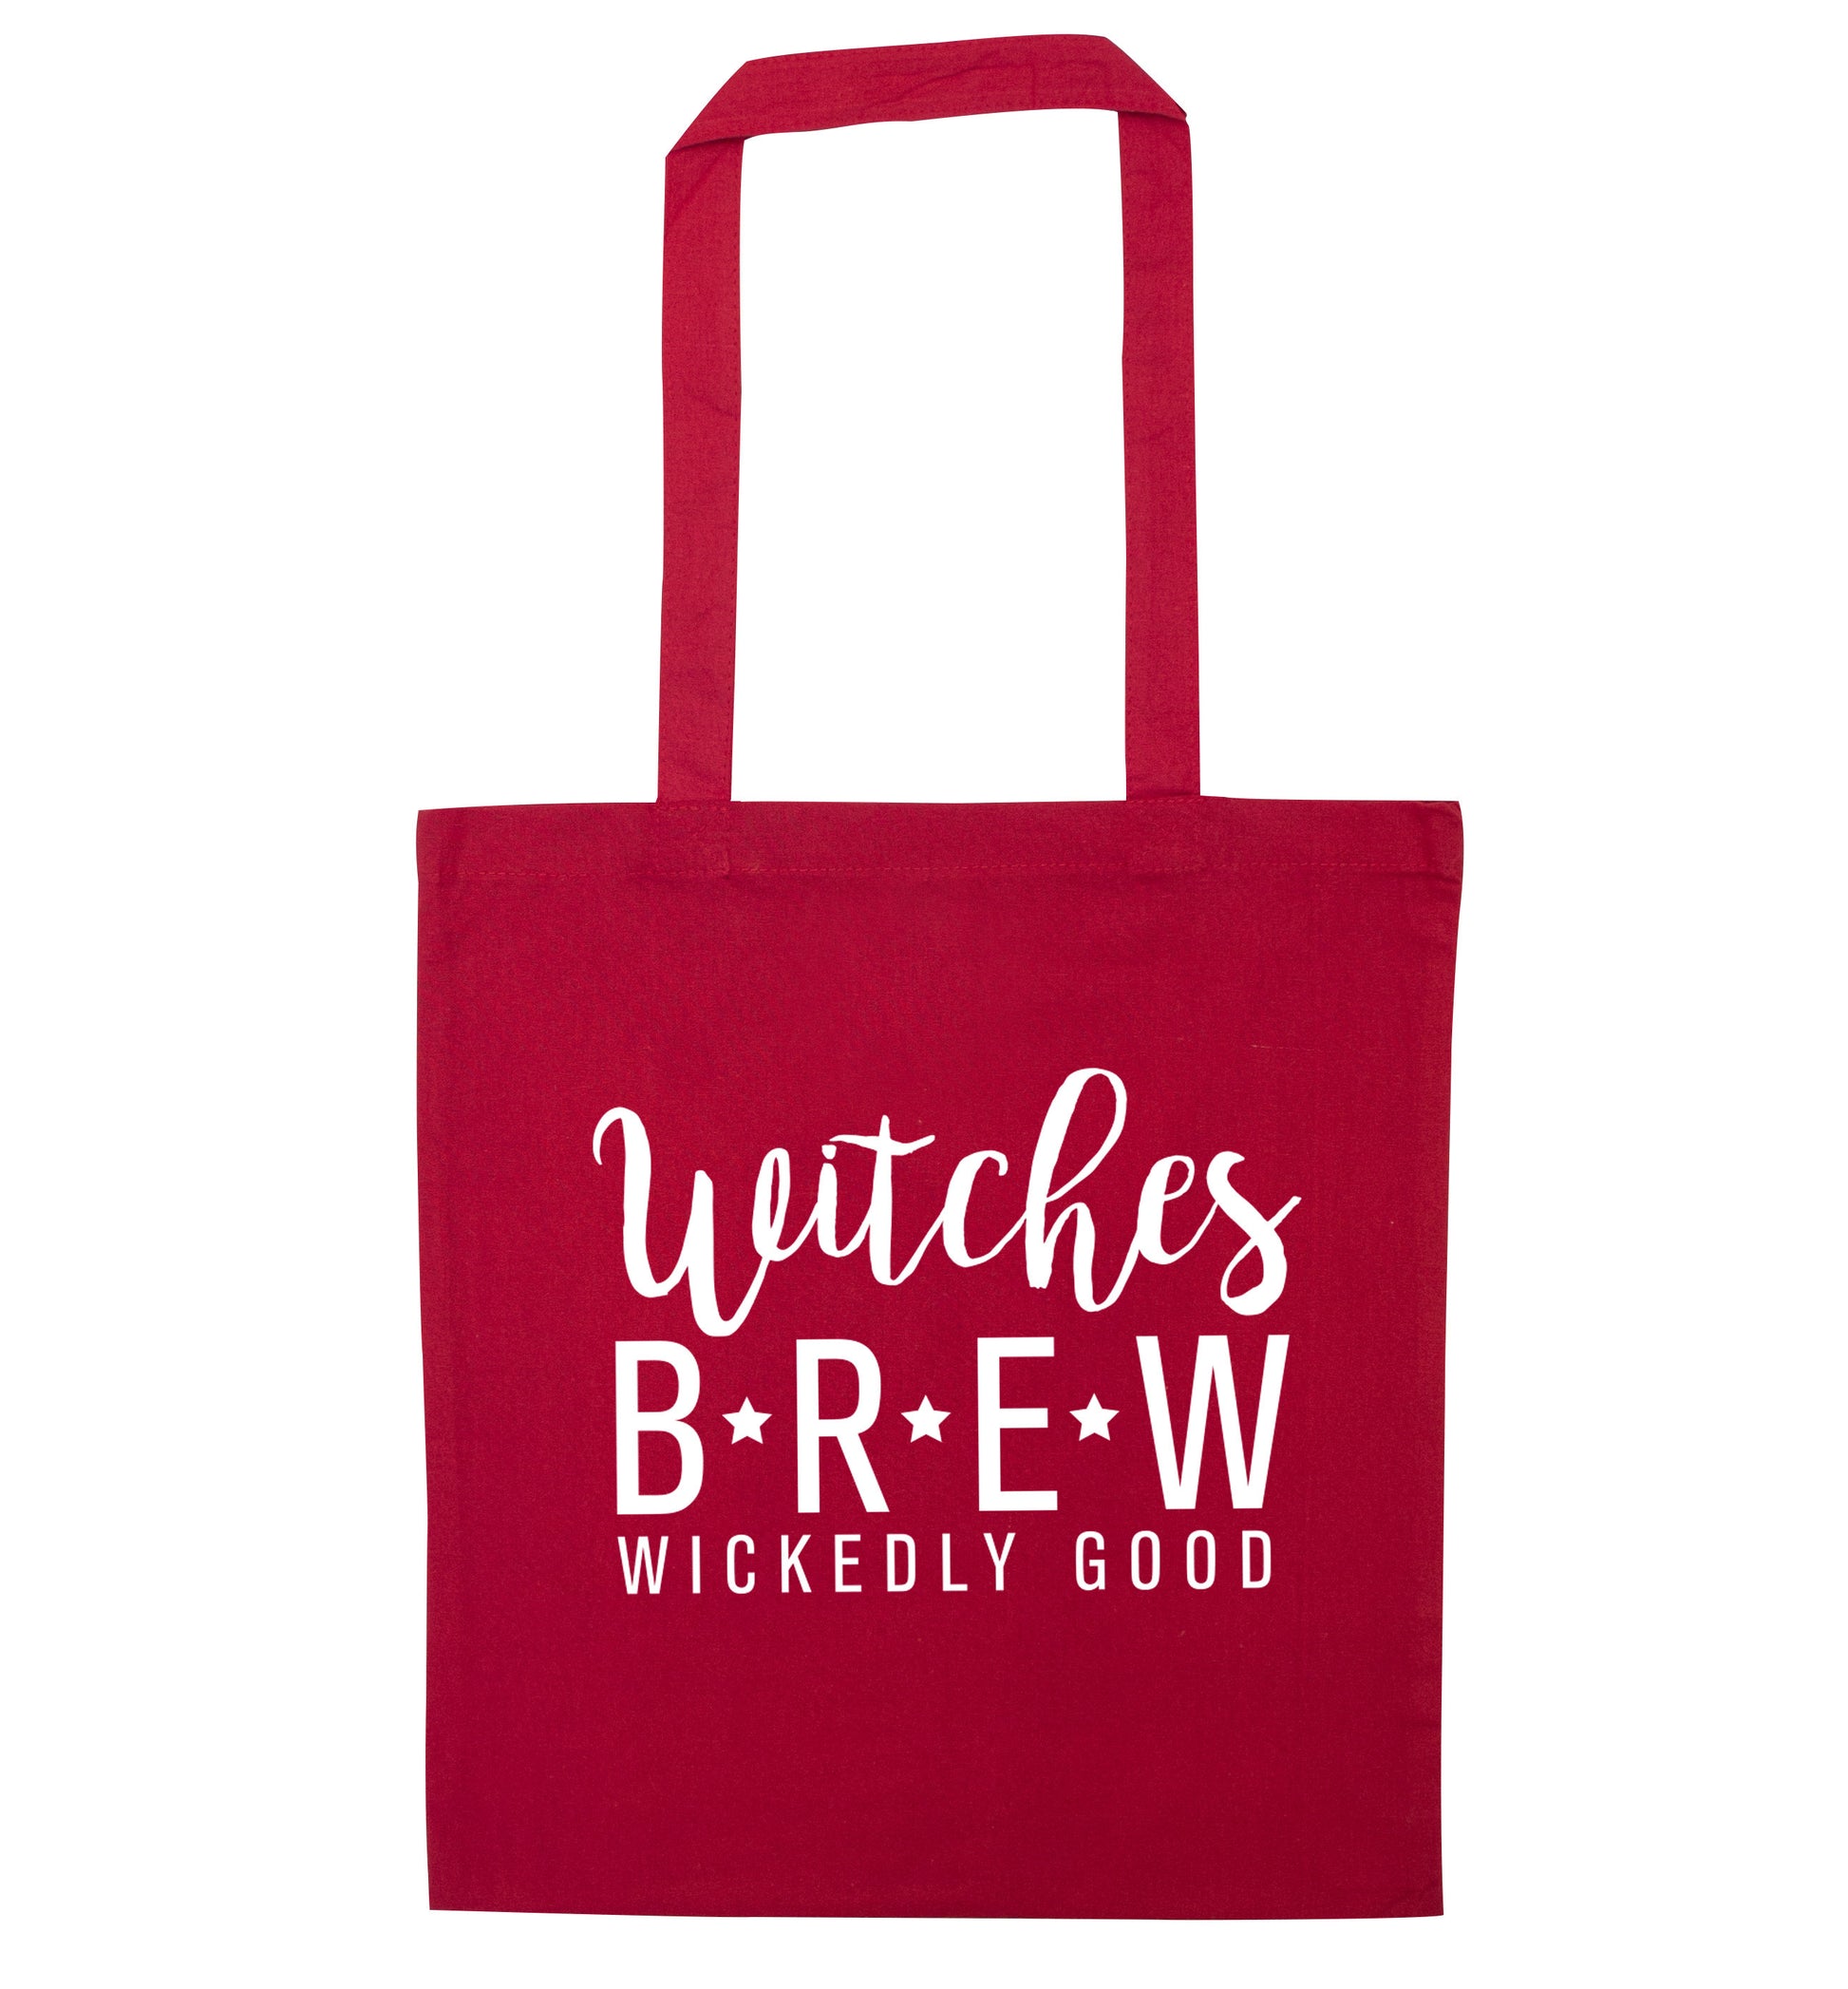 Witches Brew wickedly good red tote bag